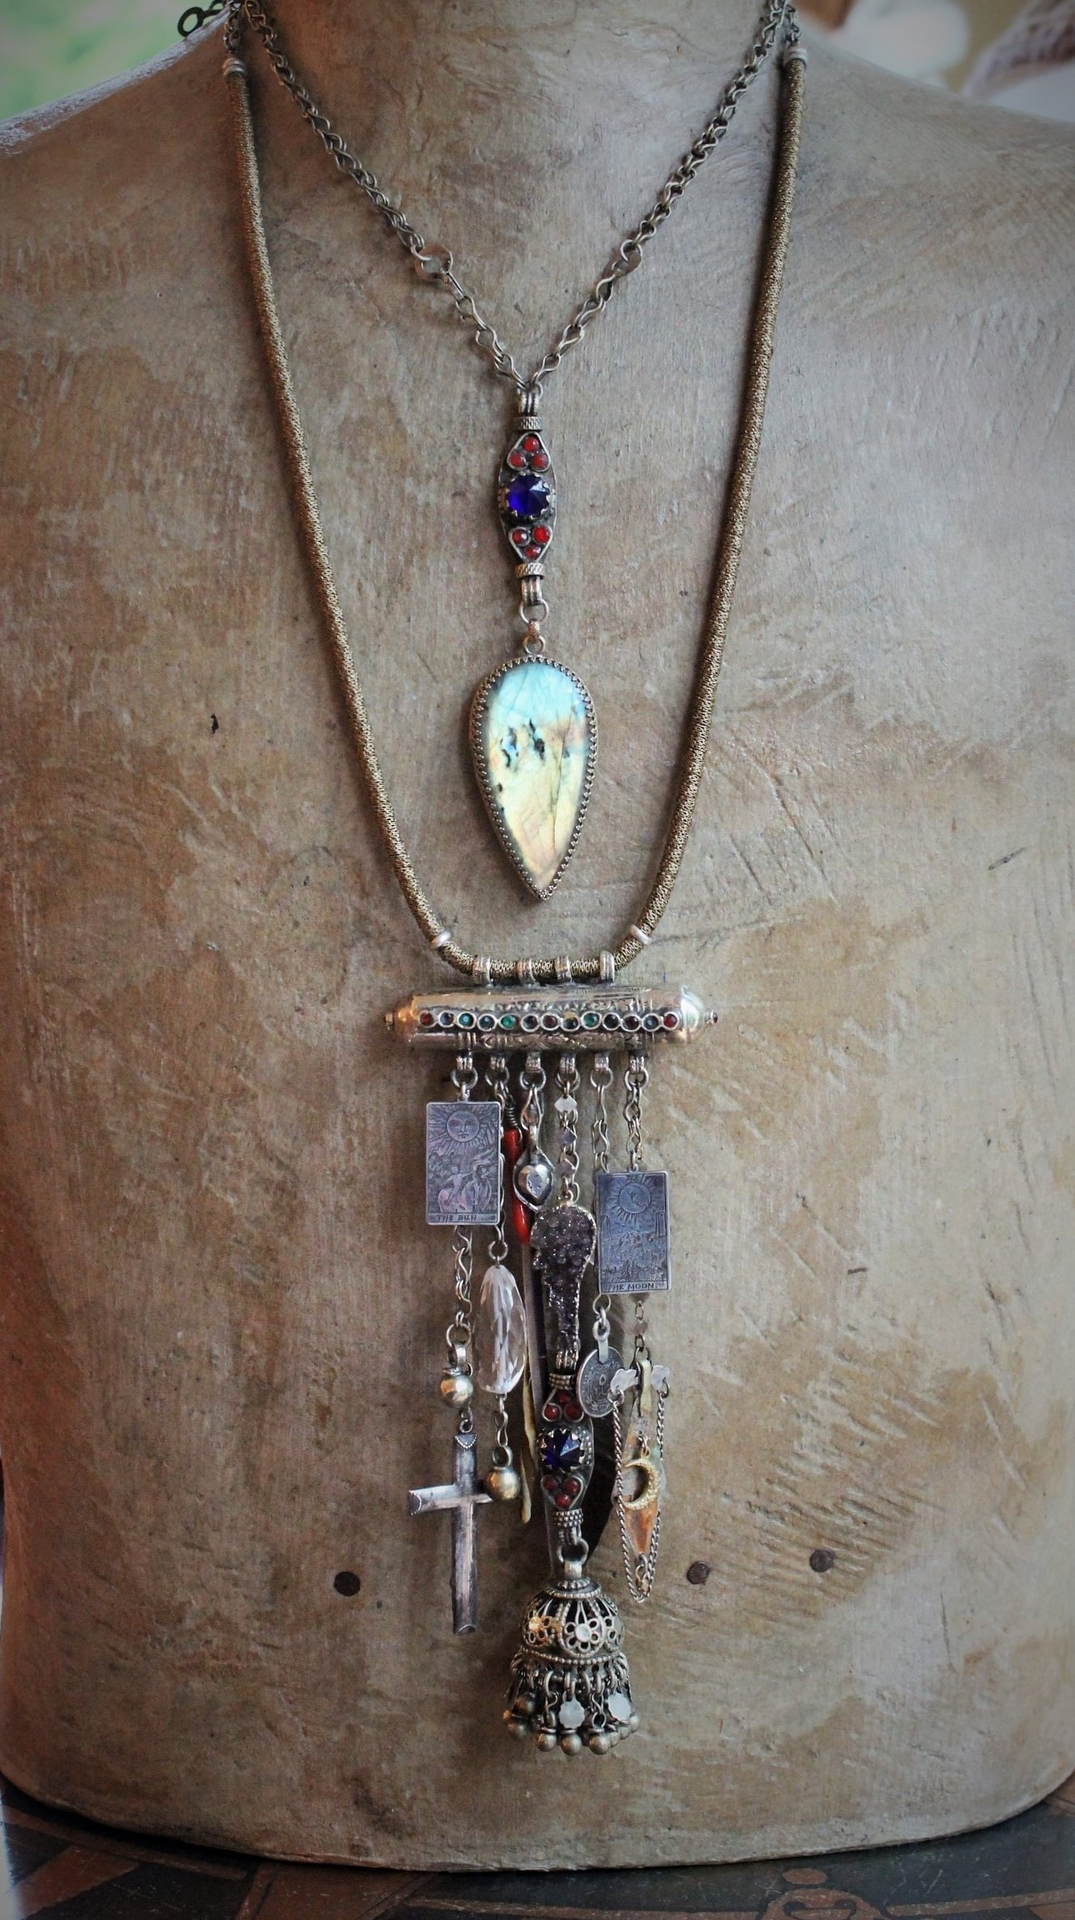 Celestial Gypsy Necklace Set w/AMAZING Labradorite Stone,Sterling Sun & Moon Tarot Medals,Amethyst Druzy Angel Wing,Antique Cross,Faceted Rock Crystal & Much More!